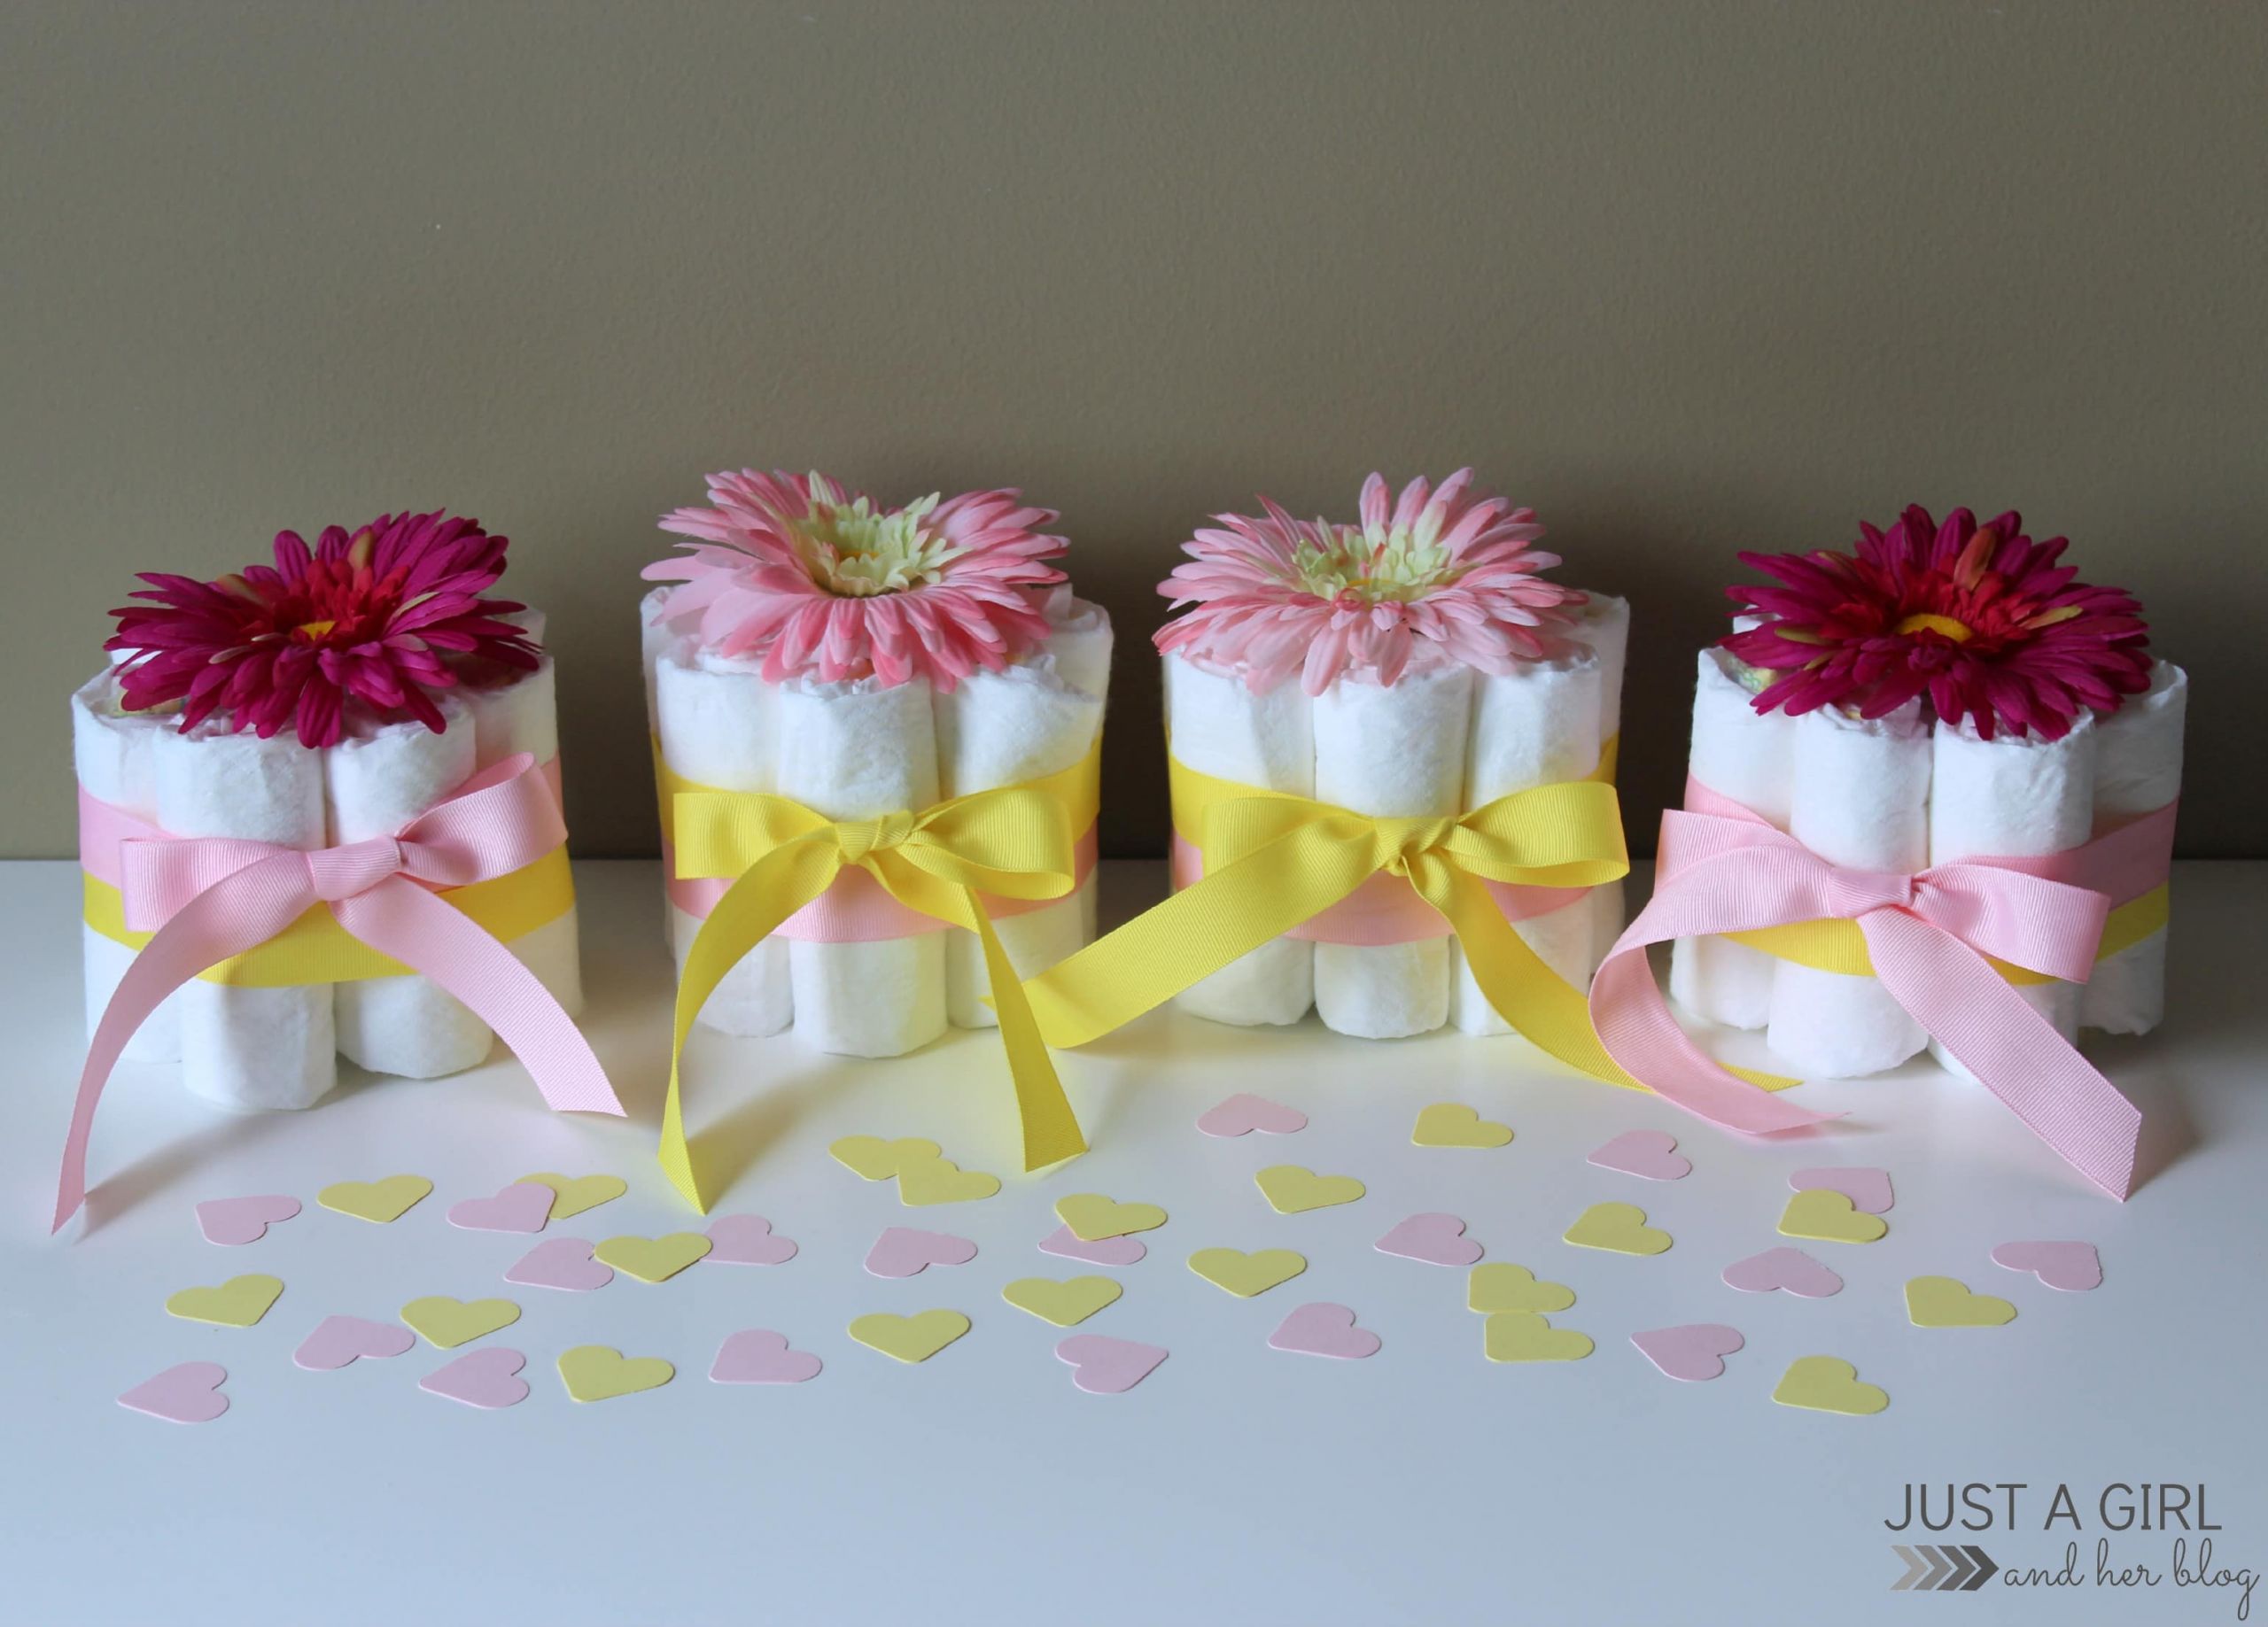 DIY Baby Shower Centerpieces For Girl
 Sweet and Simple Baby Shower Centerpieces